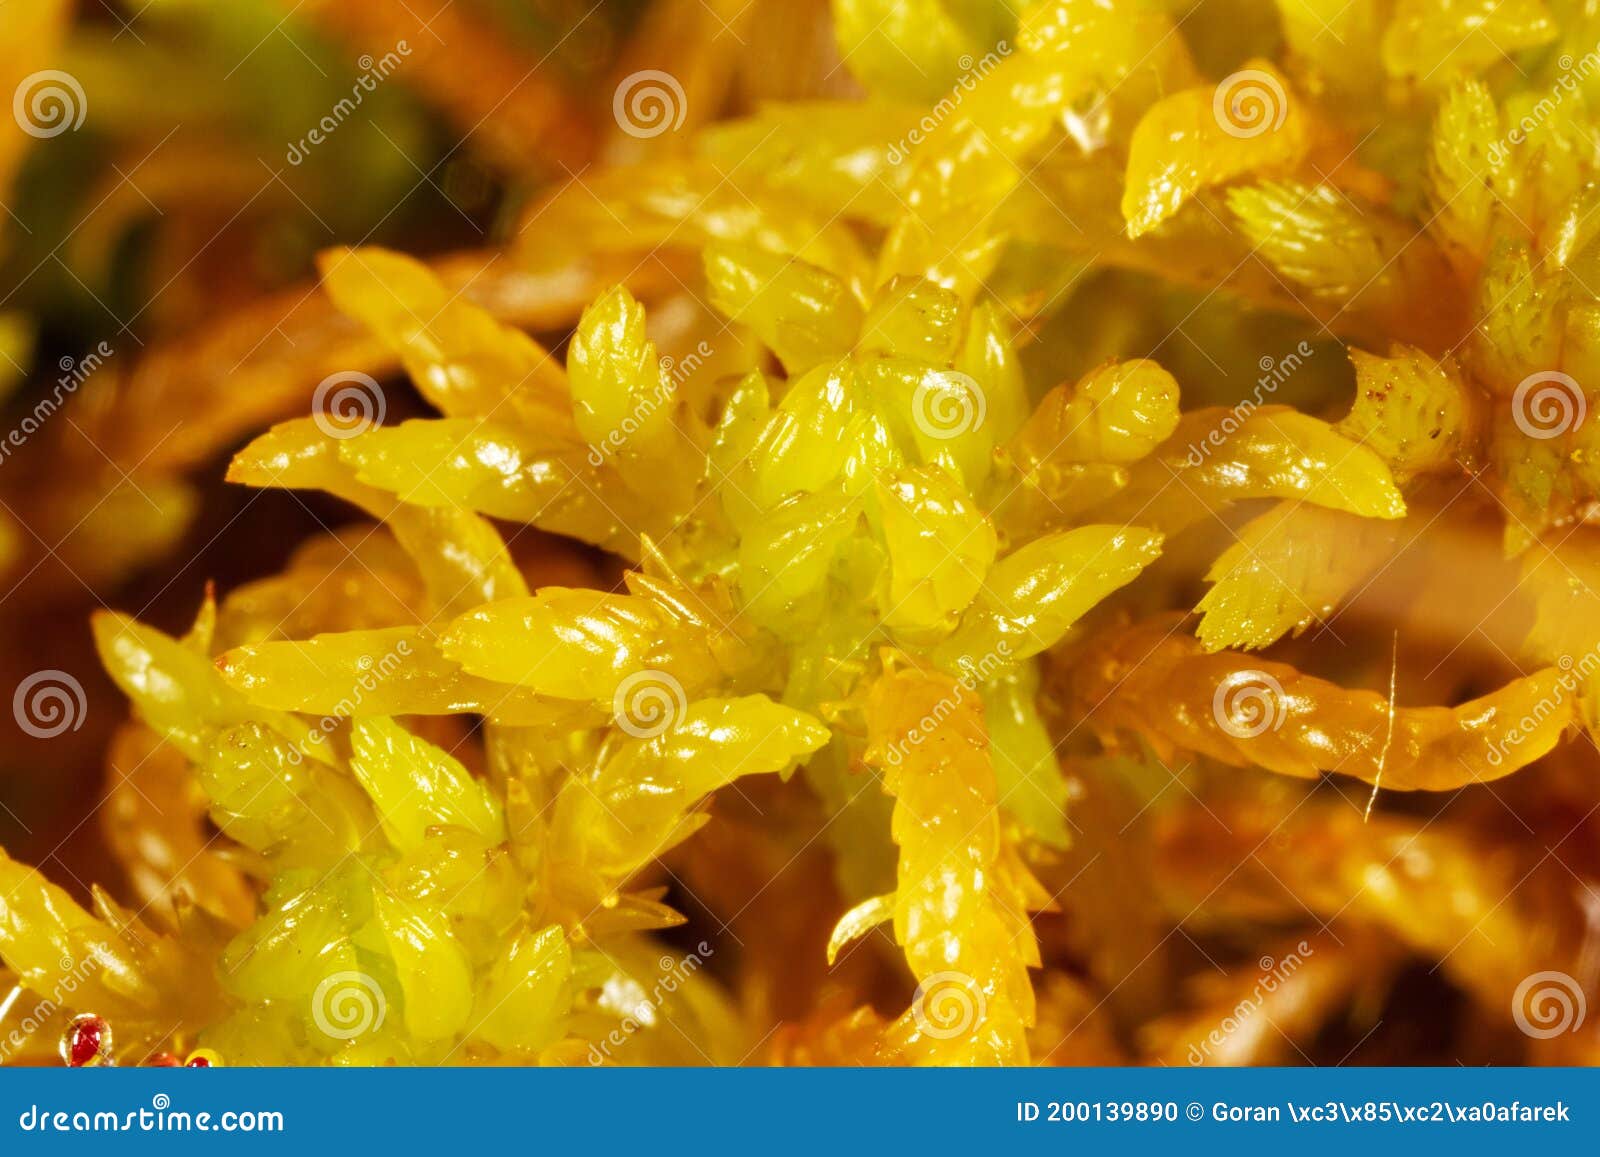 a close-up of a sphagnum moss in a bog or fen